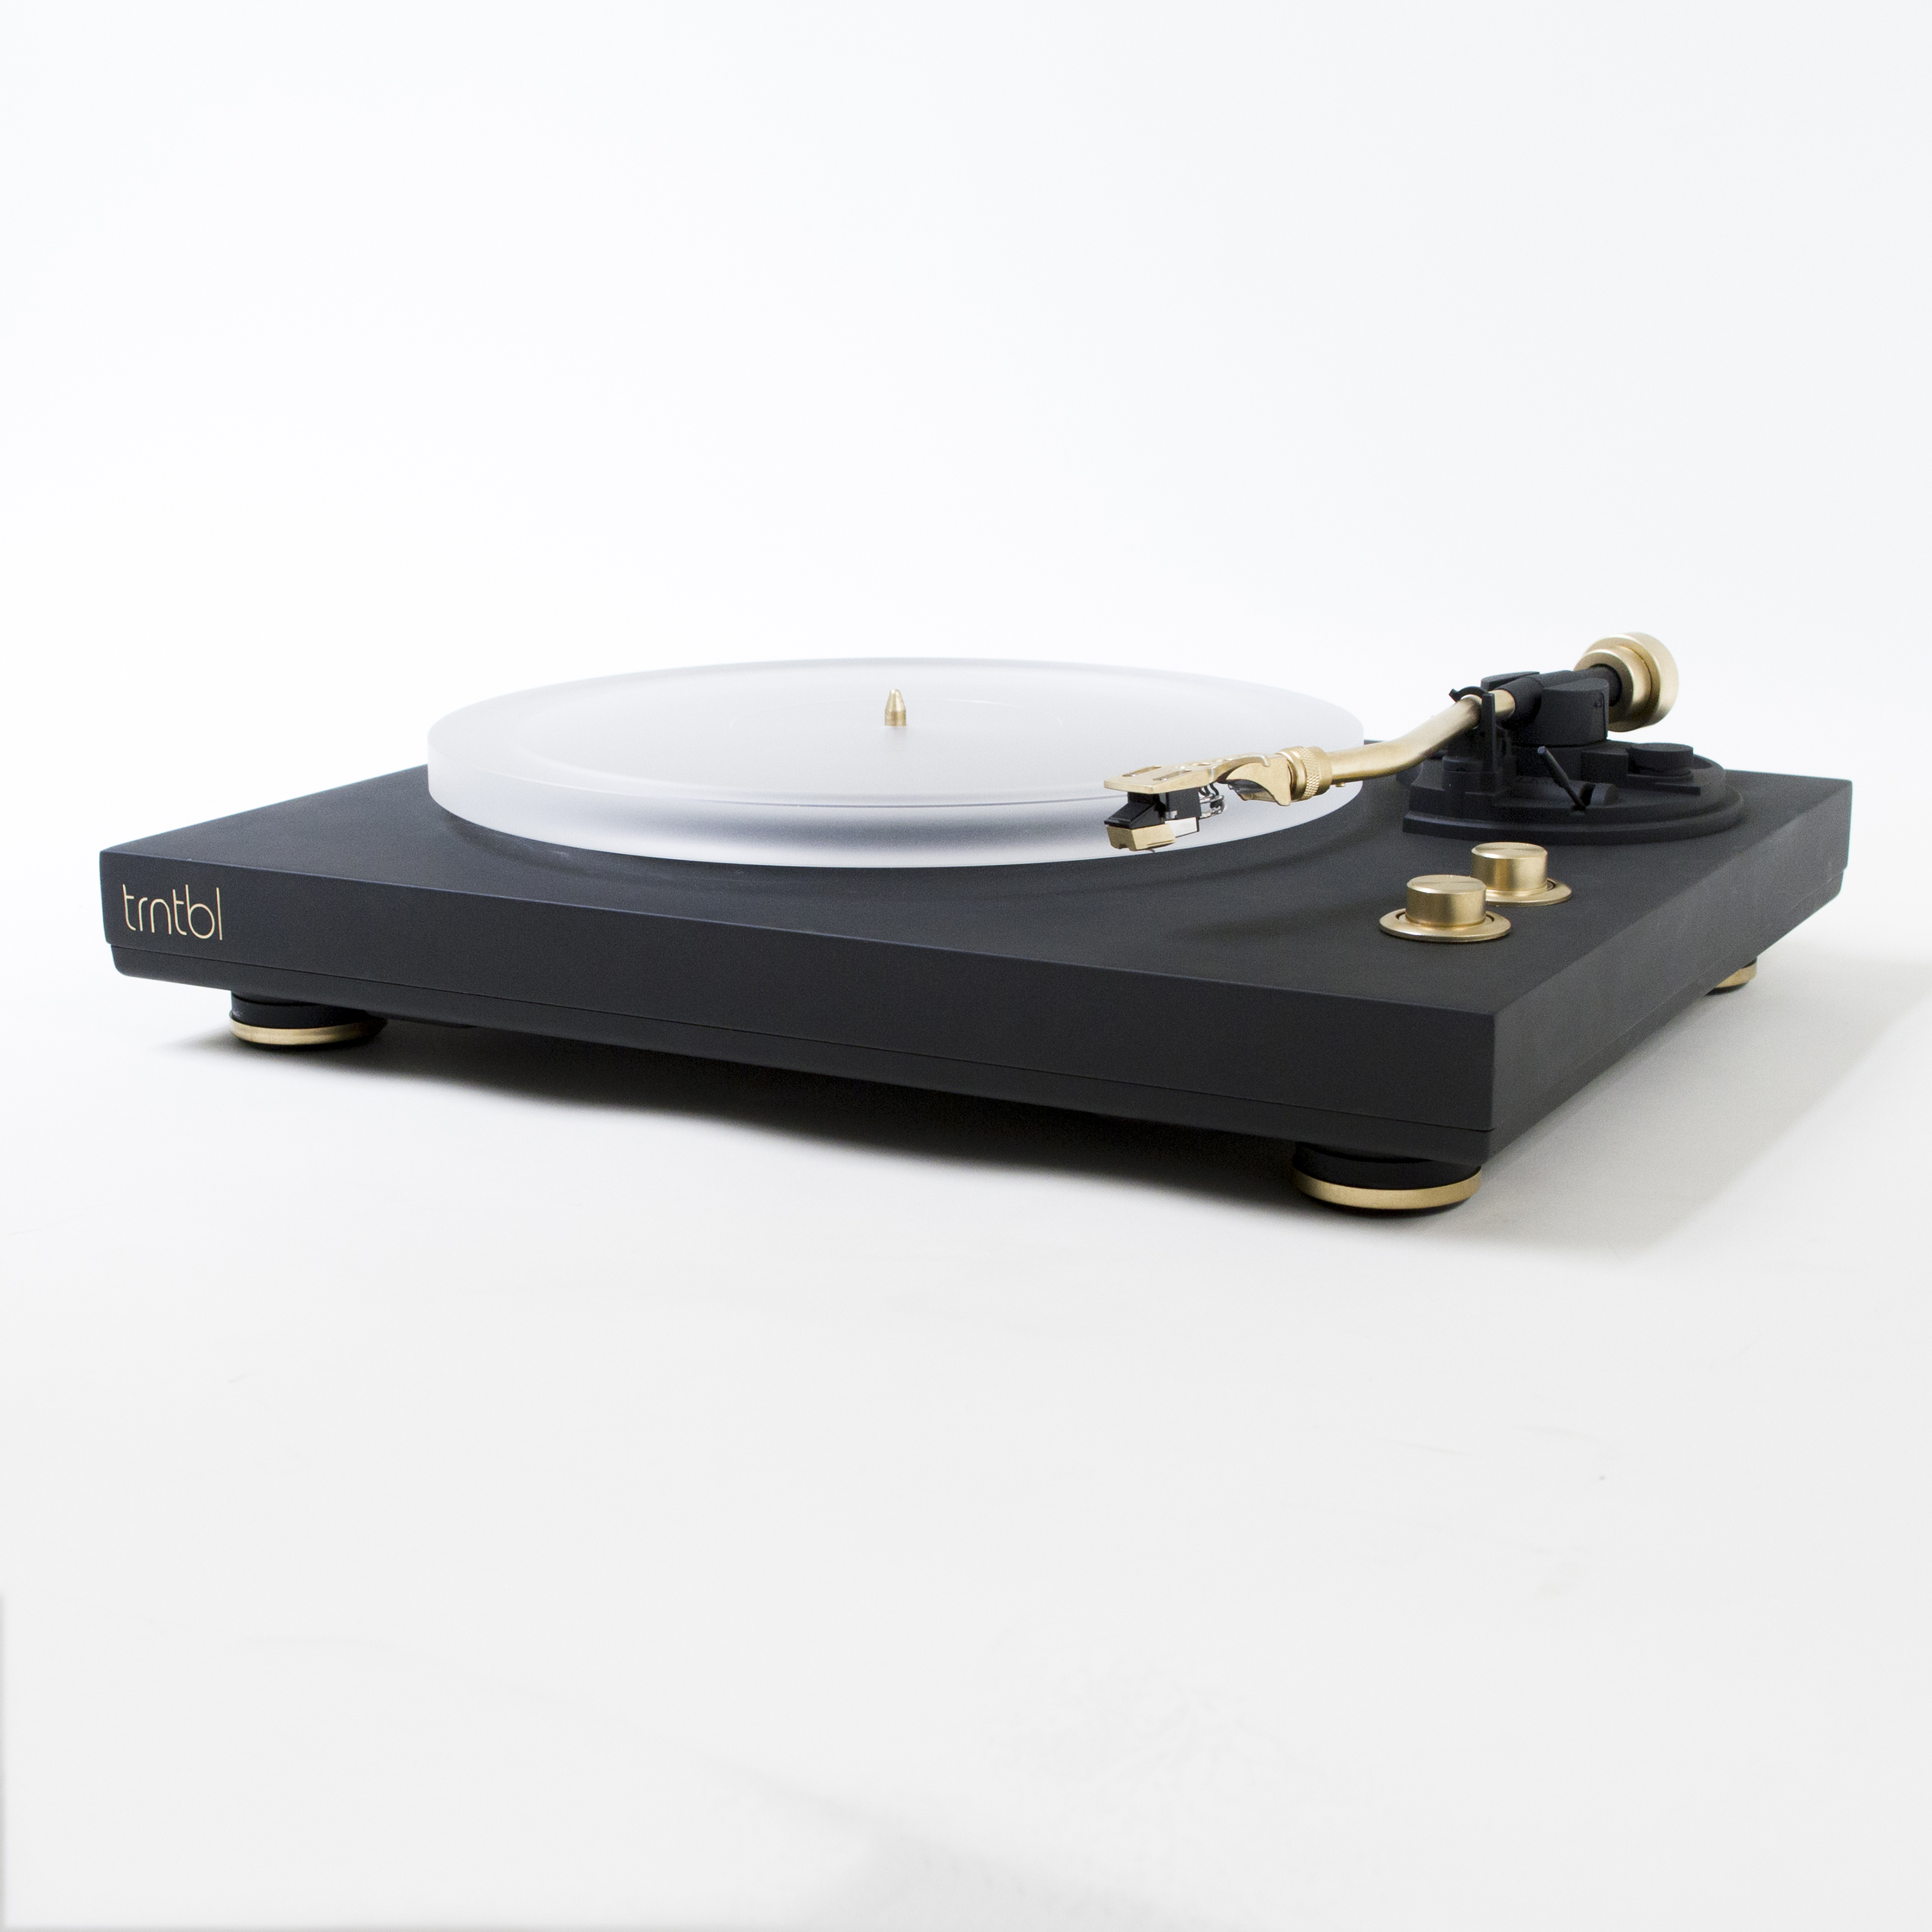 Sæbe bleg lykke Turntable Plays Vinyl, And Shares What You're Spinning On Social Media -  That Eric Alper